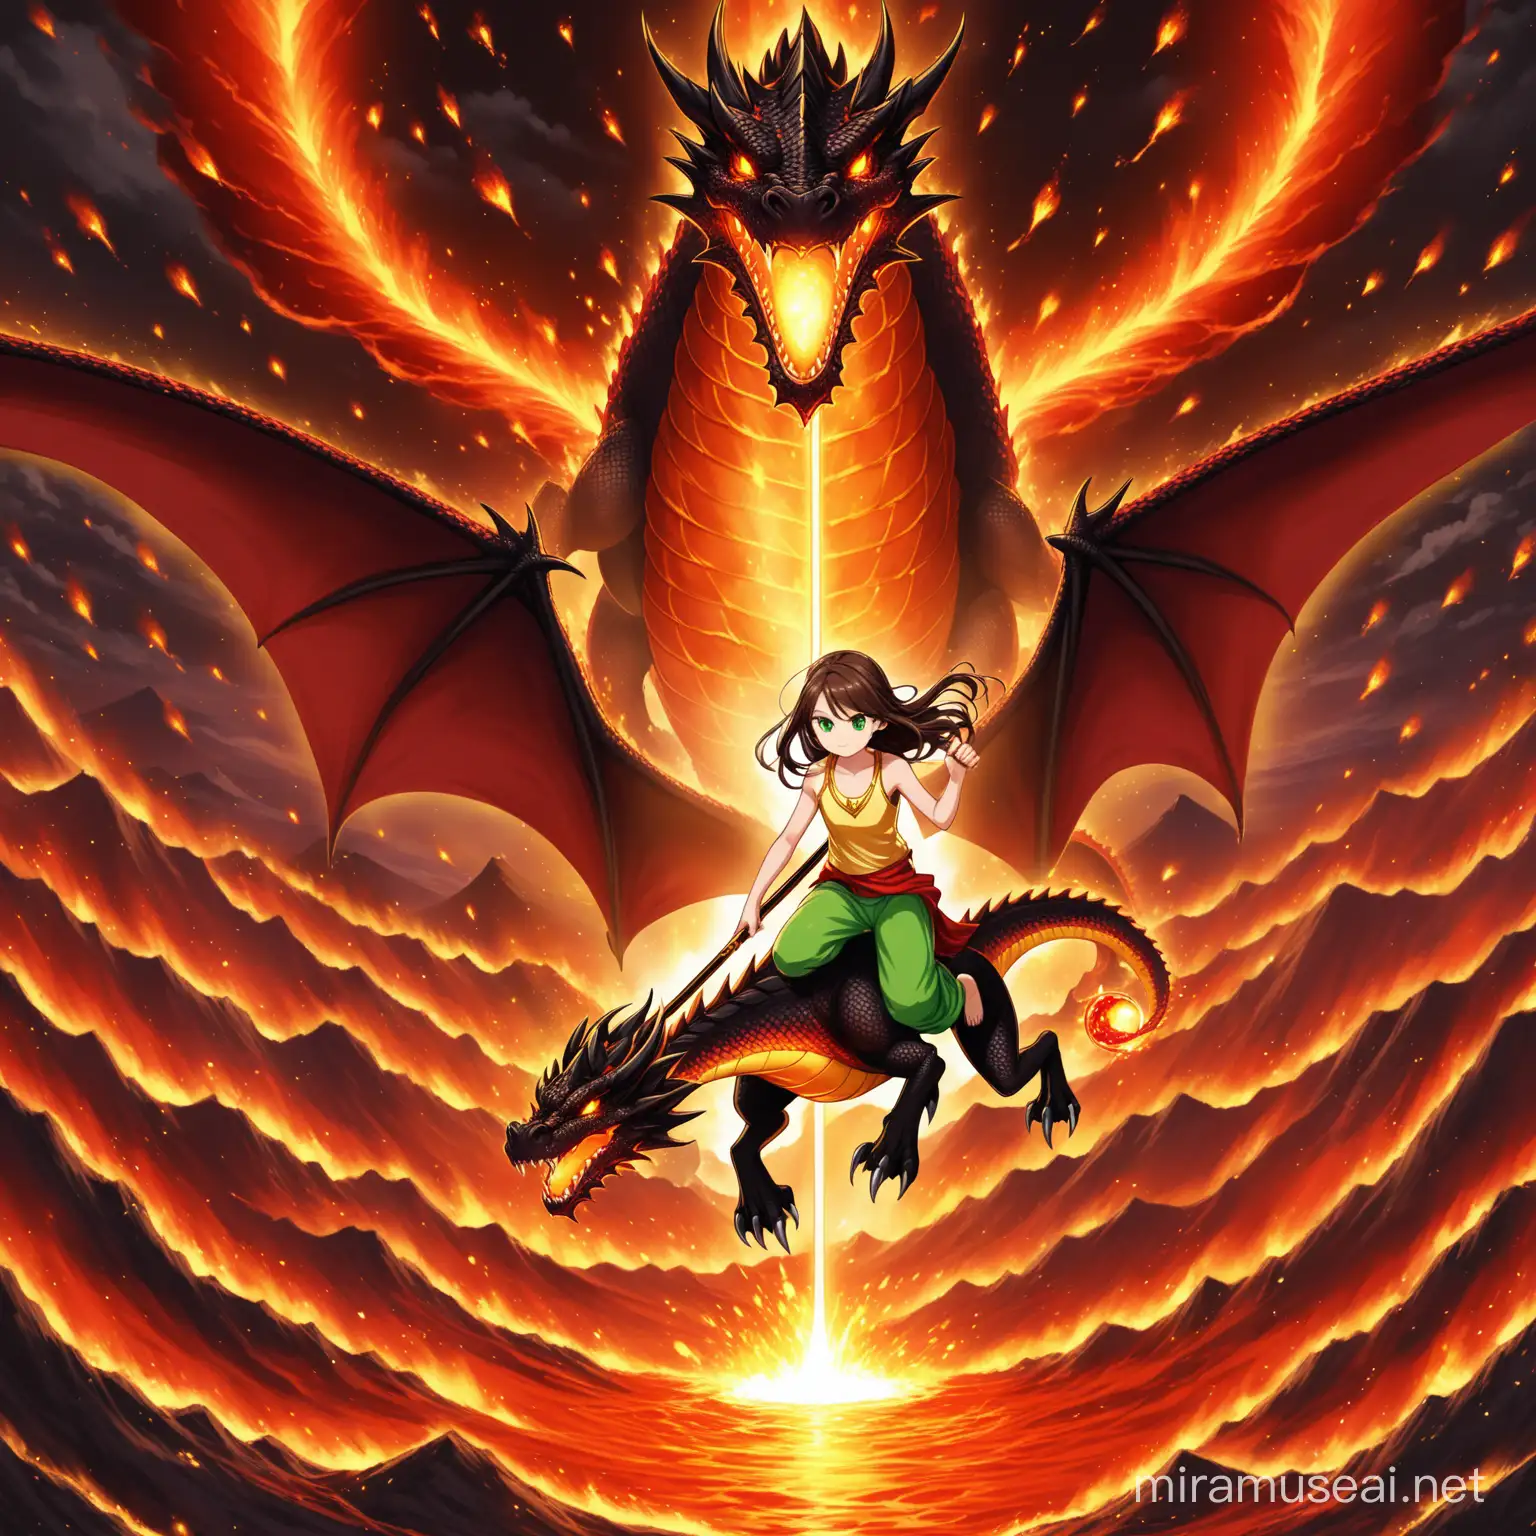 11 year old girl, long wavy brown hair, green eyes, riding a red and black majestic beautiful flying dragon, gold singlet, red and gold shawl, green harem pants, flying over a volcano eruption, lava flying everywhere, determined expression, holding a gold and black staff with a gold glowing crystal ball on top, 